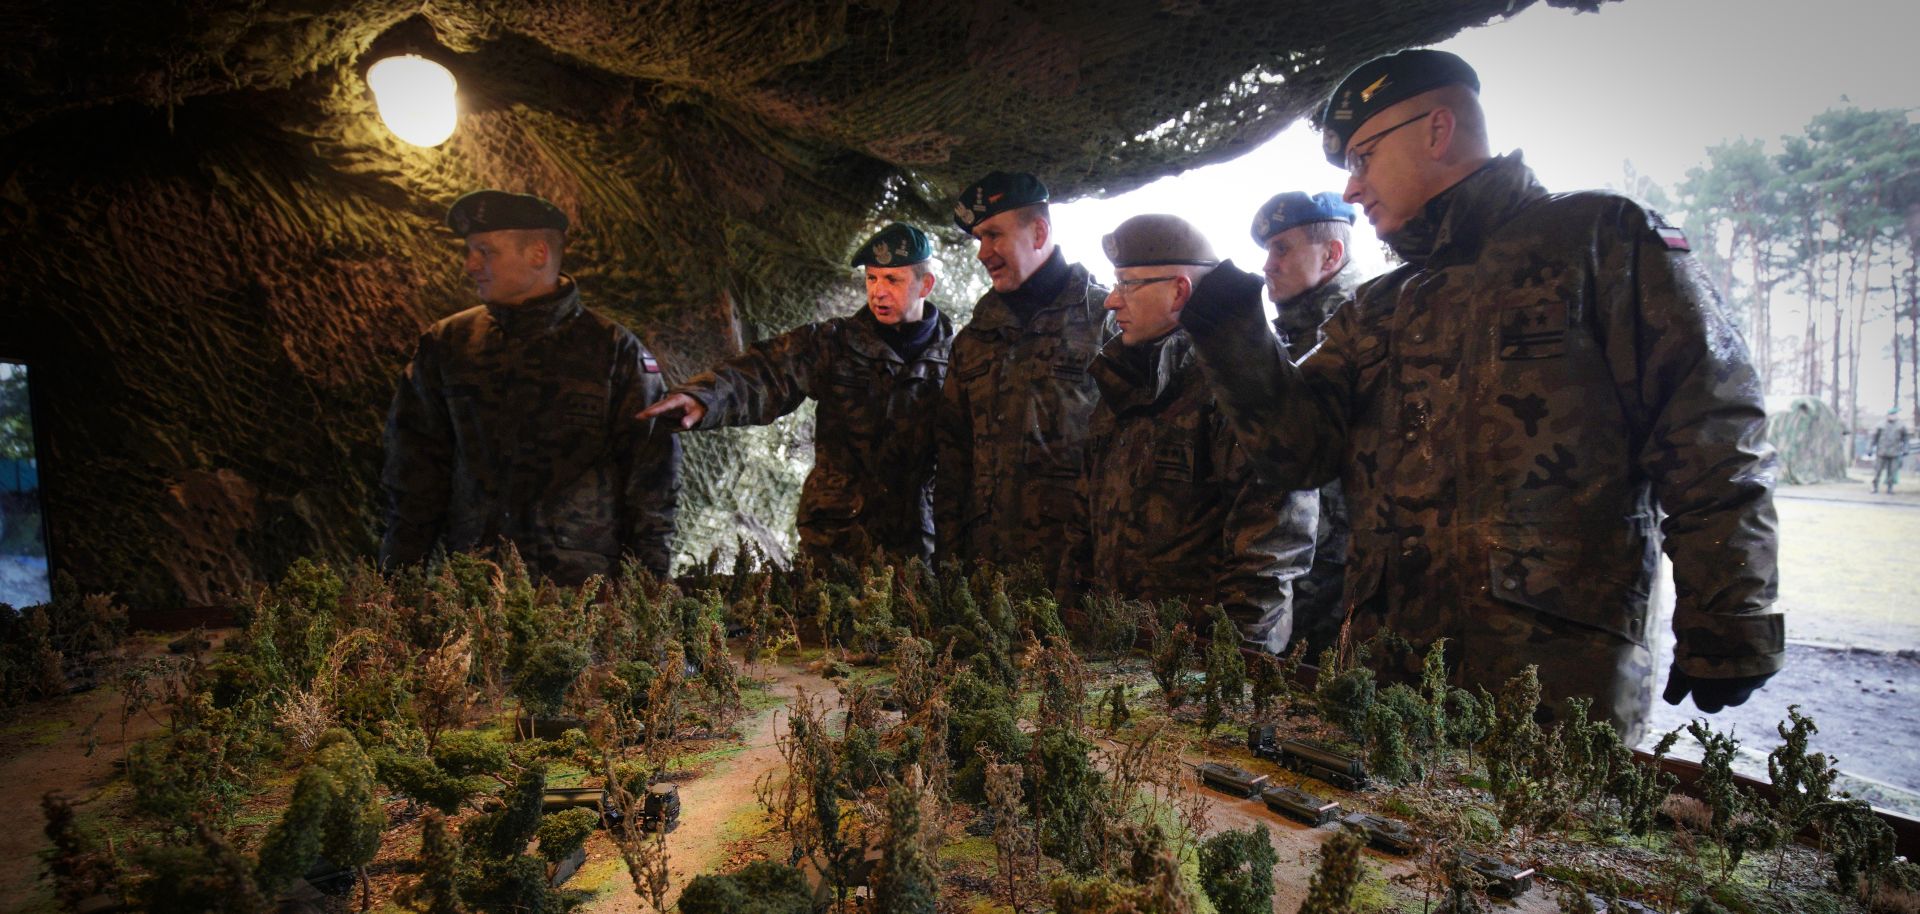 A three star general visits an exhibit at a military base in Bydgoszcz, Poland on March 9, 2019.